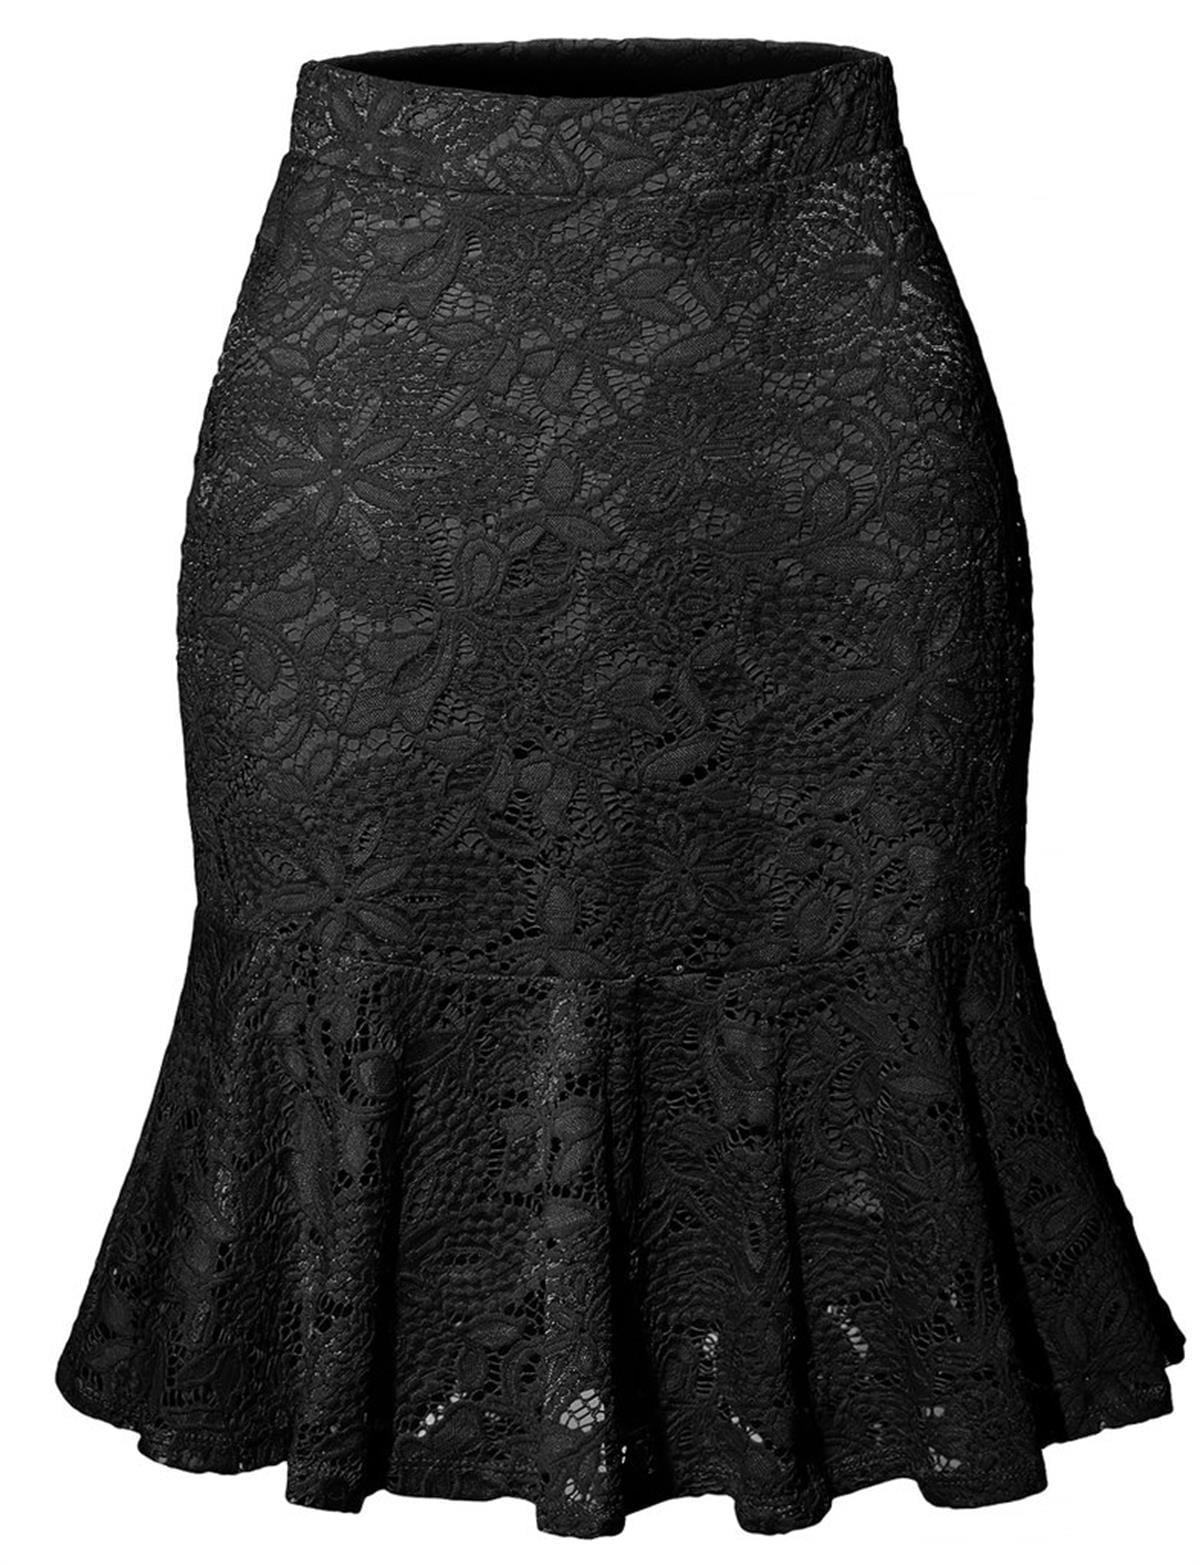 Sherrylily Women Floral Lace Skirts Elastic Waist Mermaid Pencil Skirts